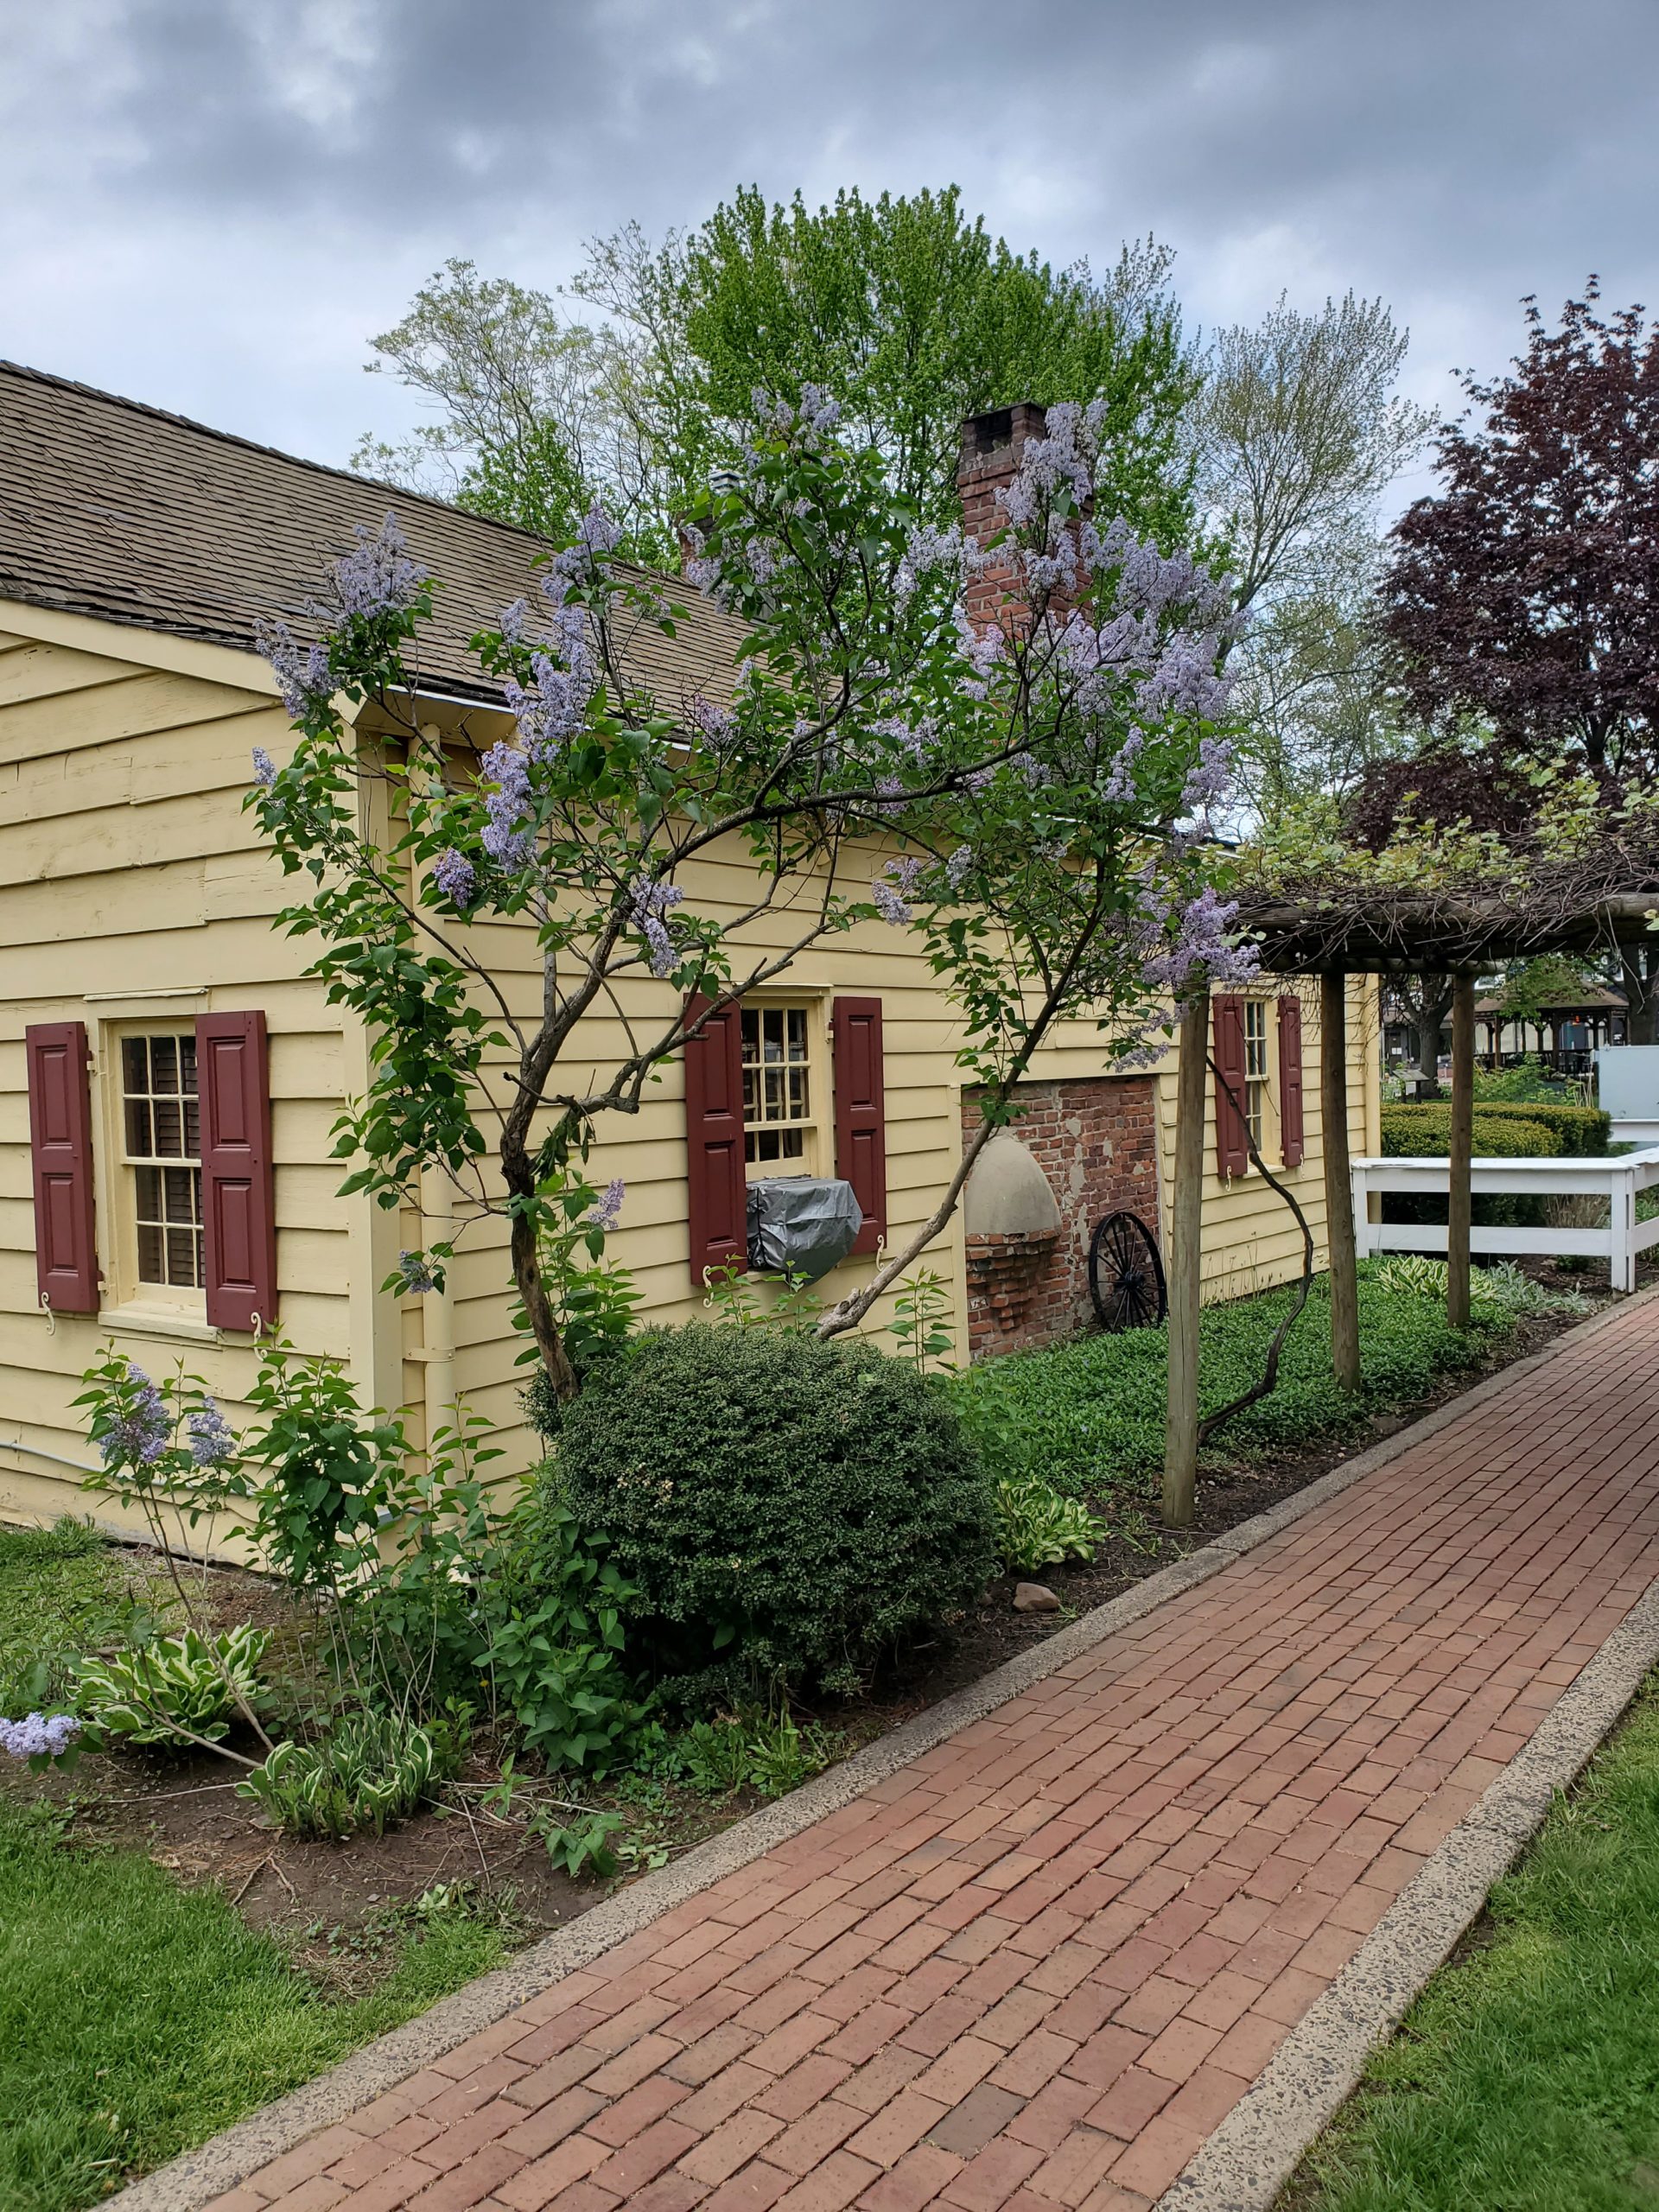 Osborn Cannonball House with flowering tree